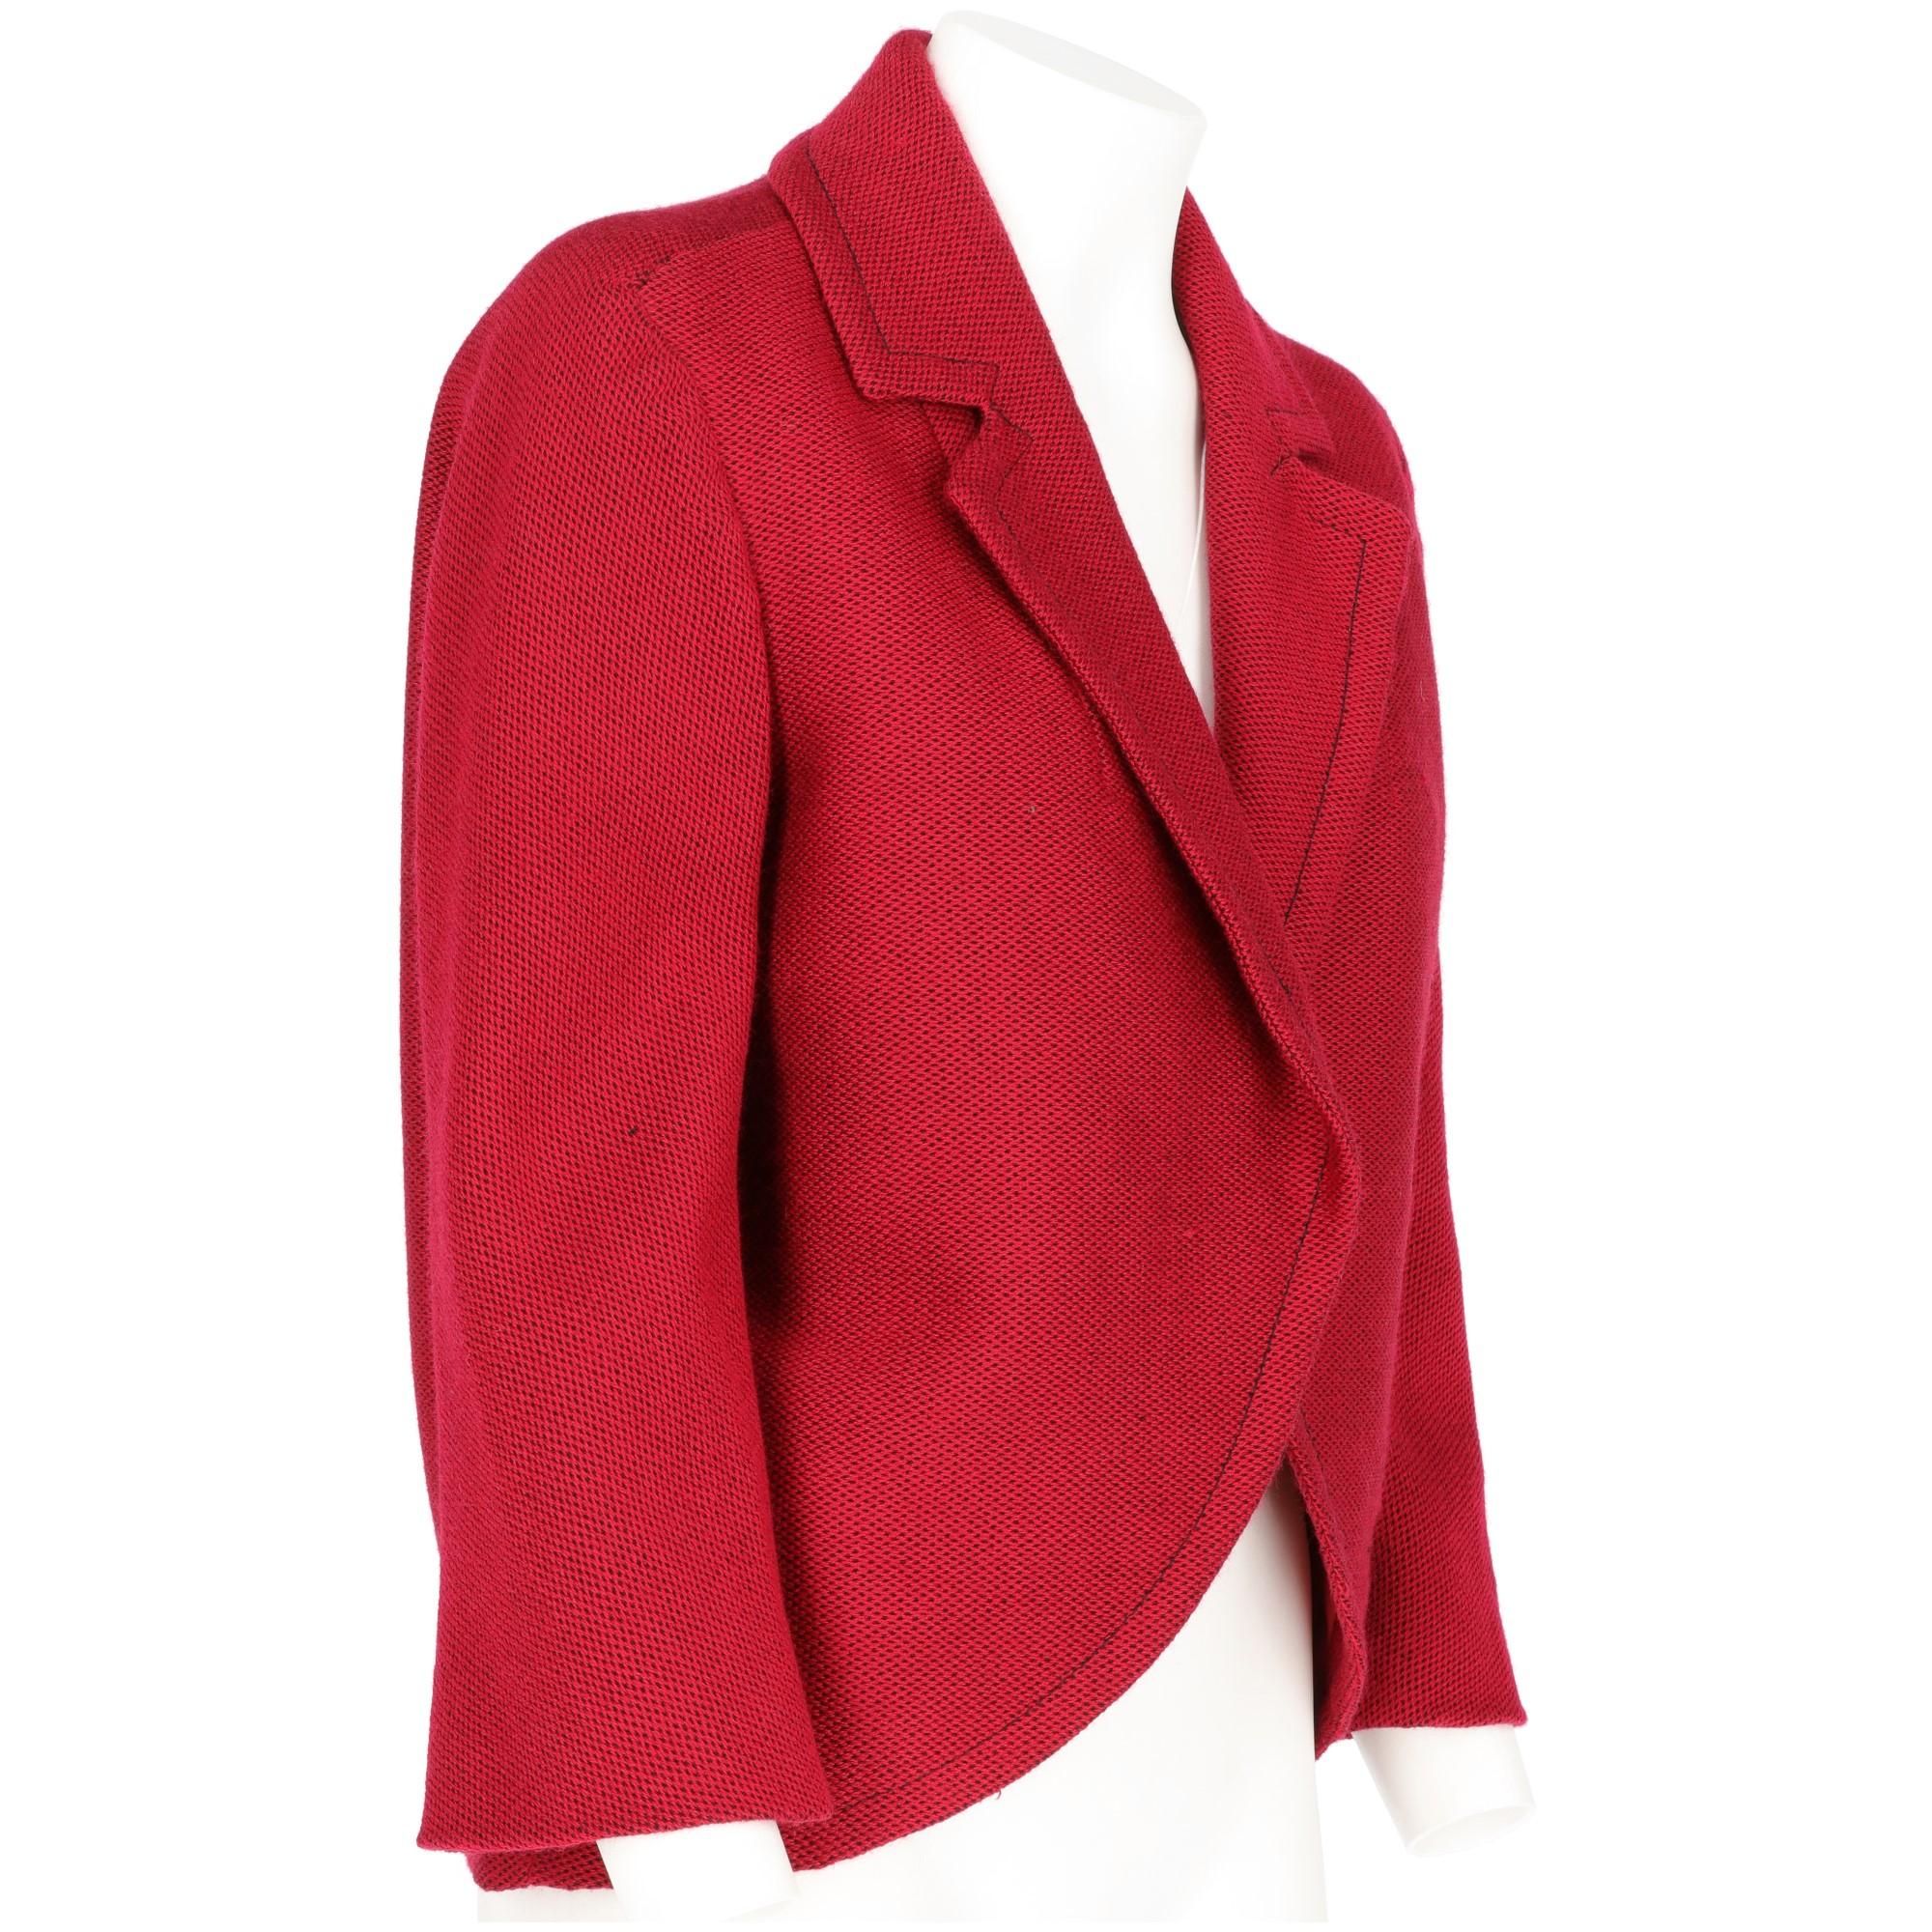 Wool woven fabric in red and black jacket, classic lapels collar, long sleeves and rounded front hem. Red lined interior.
Years: 50s

Size: 42 IT

Linear measures

Height: 58 cm
Bust: 57 cm
Shoulders: 41 cm
Sleeve: 49 cm